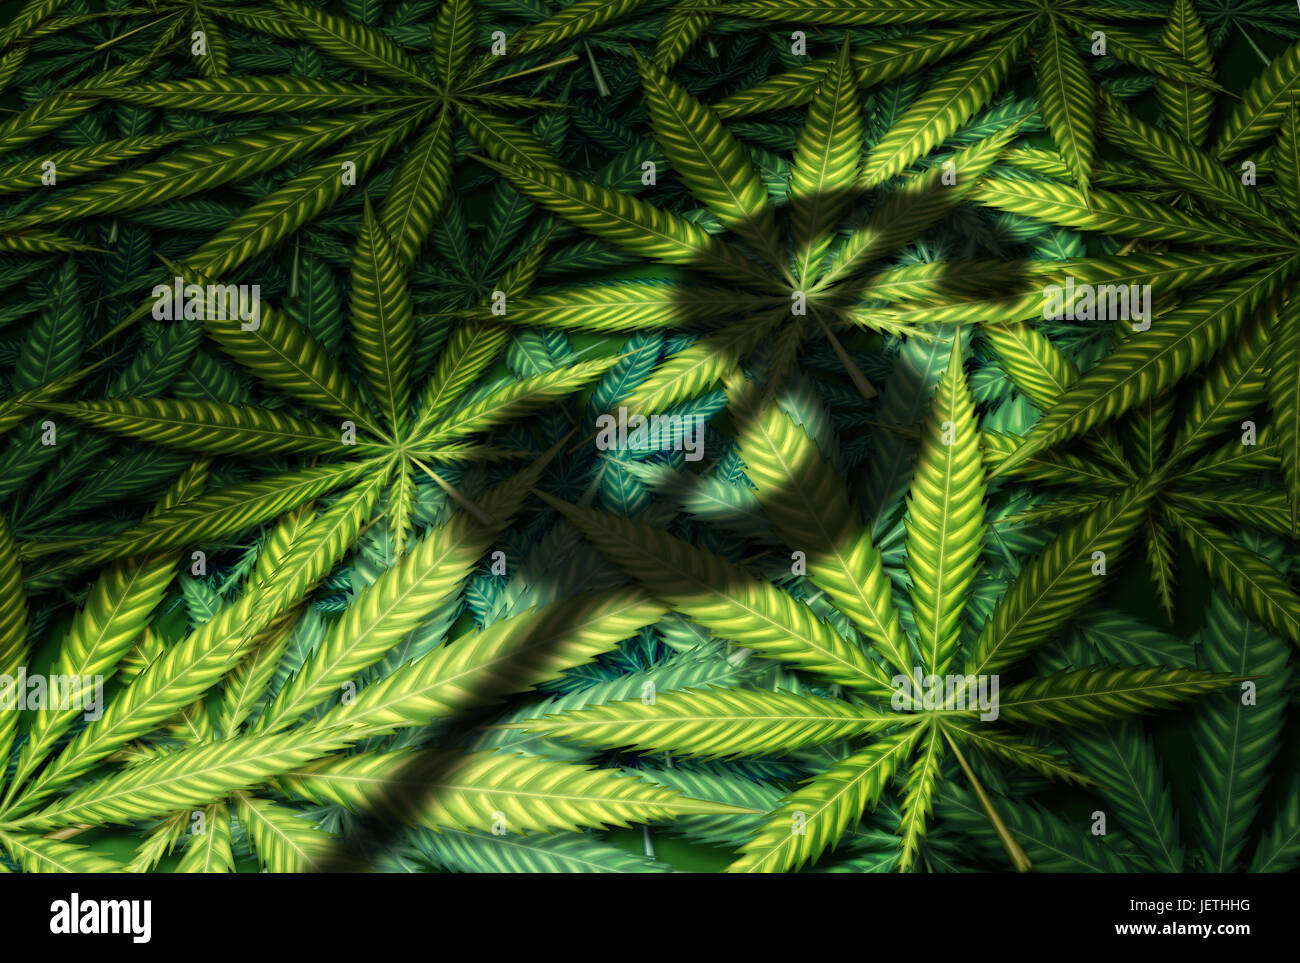 Cannabis business and marijuana industry concept as the shadow of a dollar sign on a group of leaves in a 3D illustration style. Stock Photo